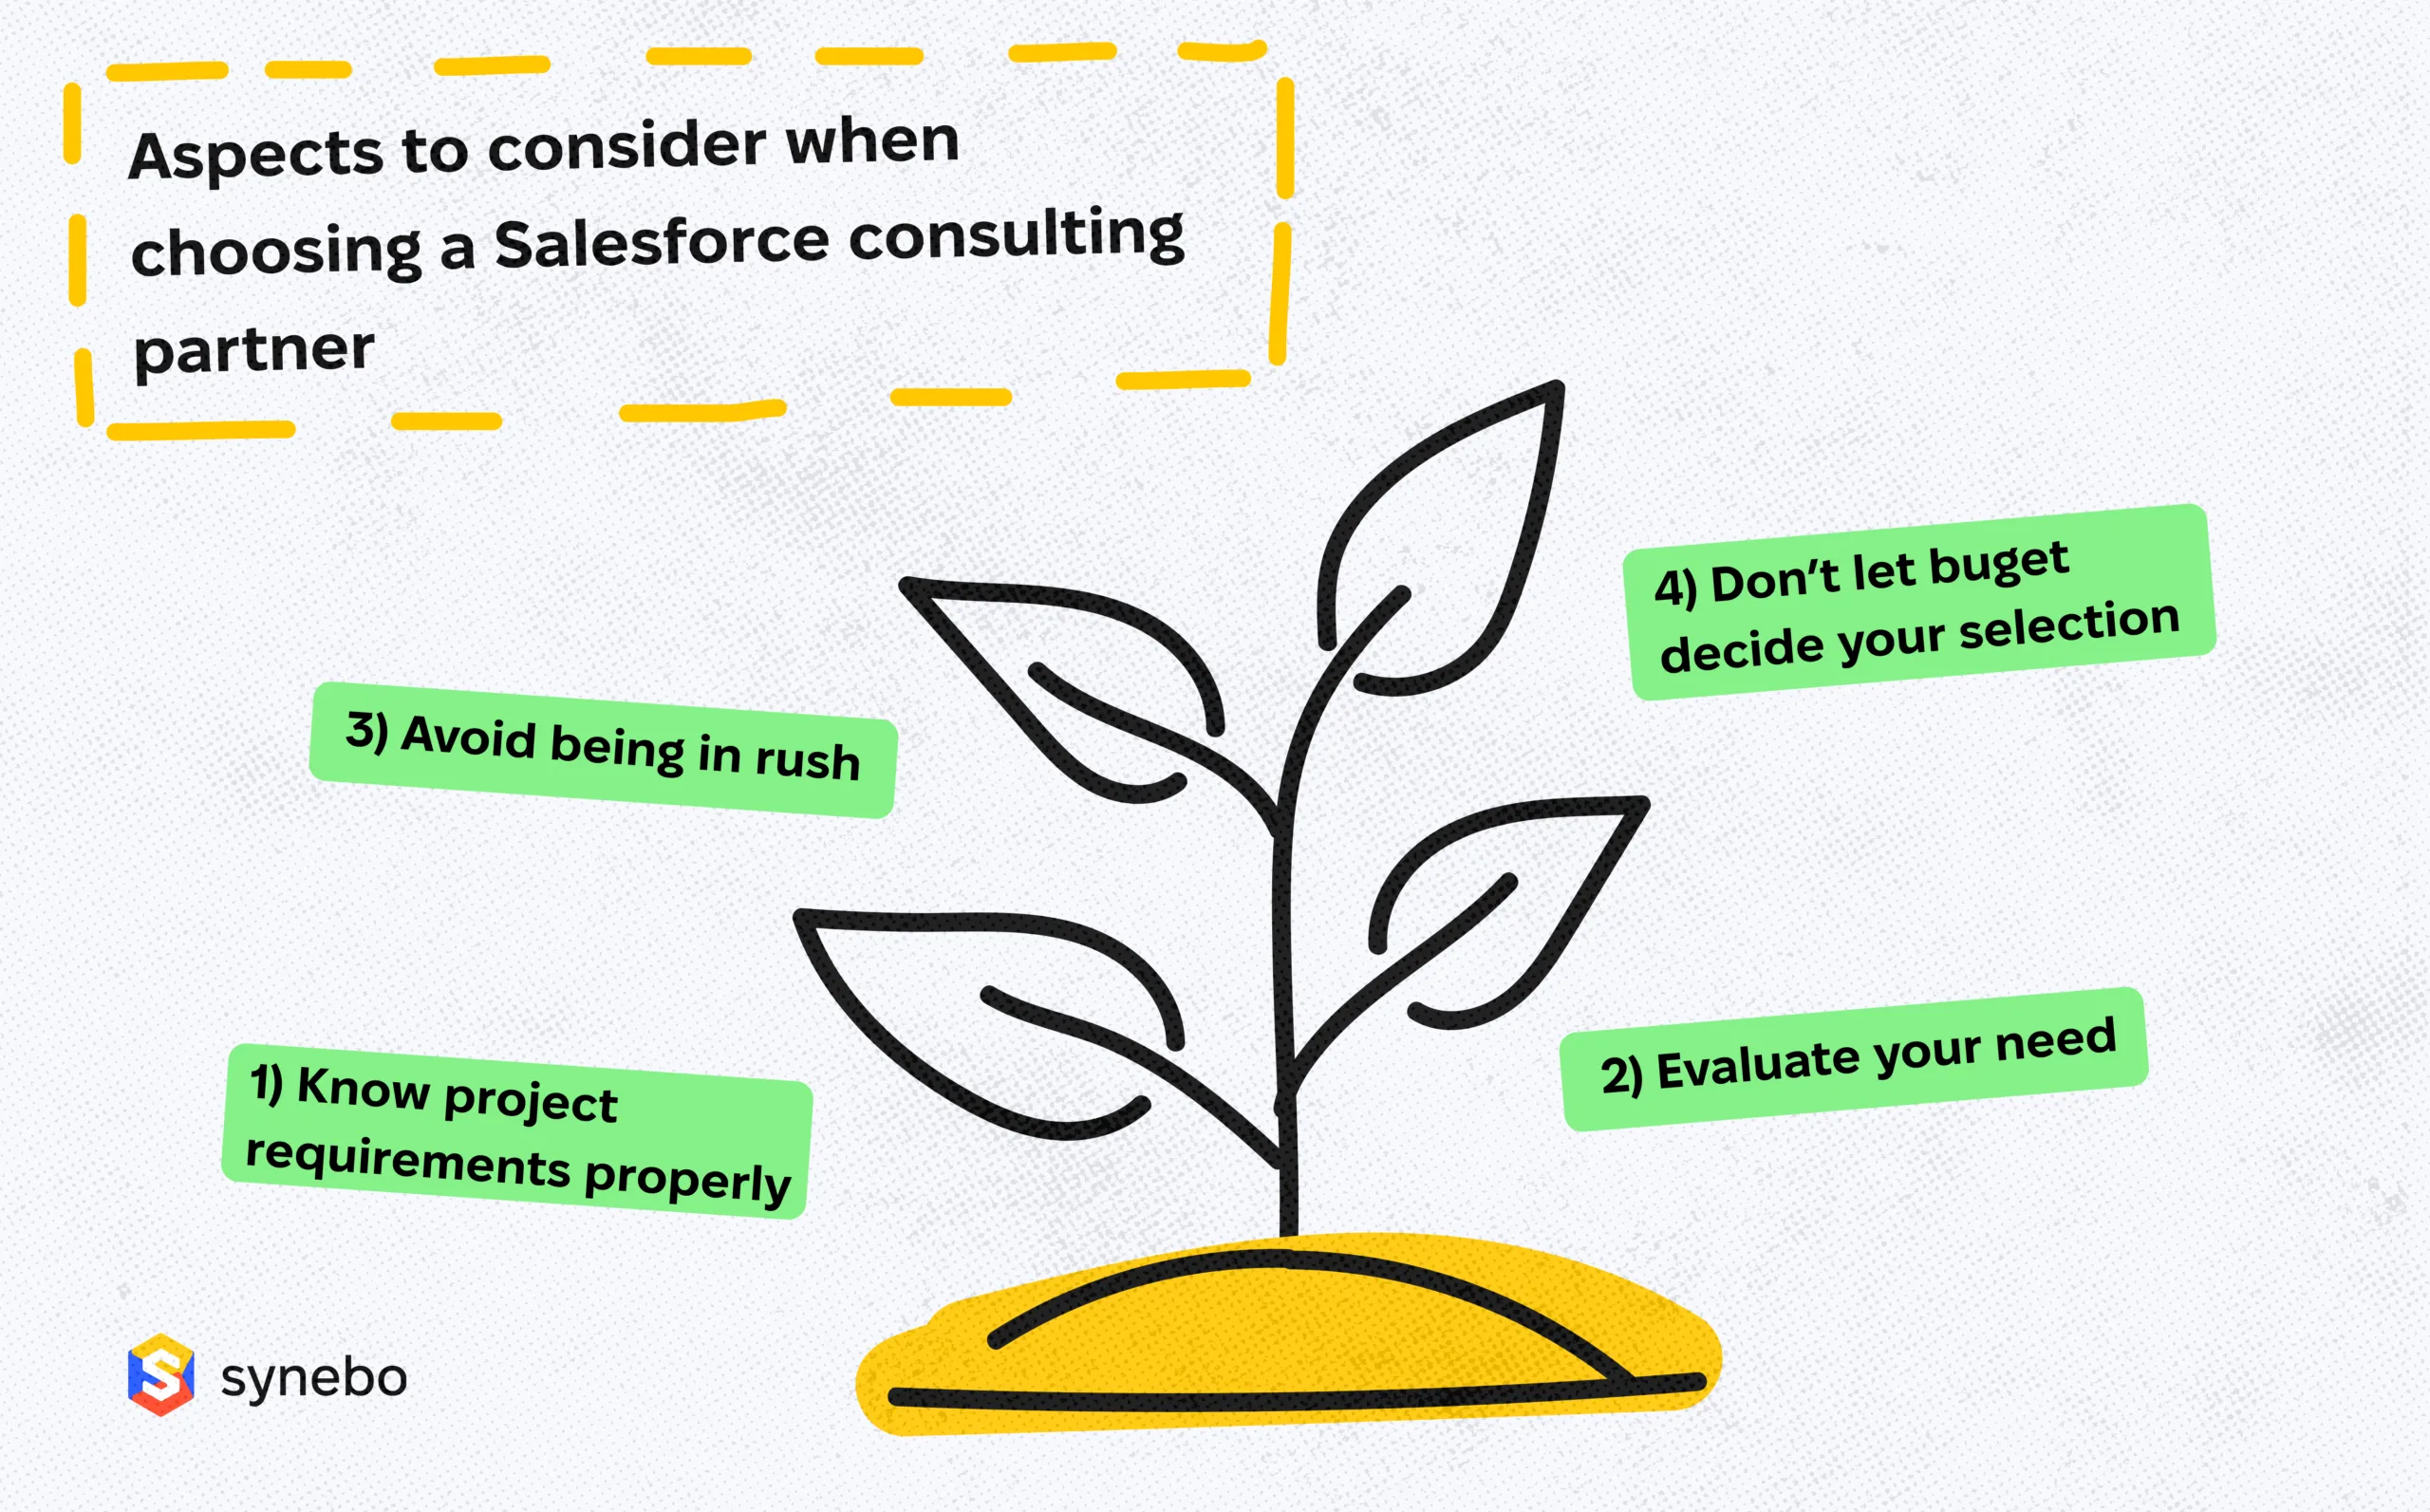 Aspects to Consider When Choosing a Salesforce Consulting Partner